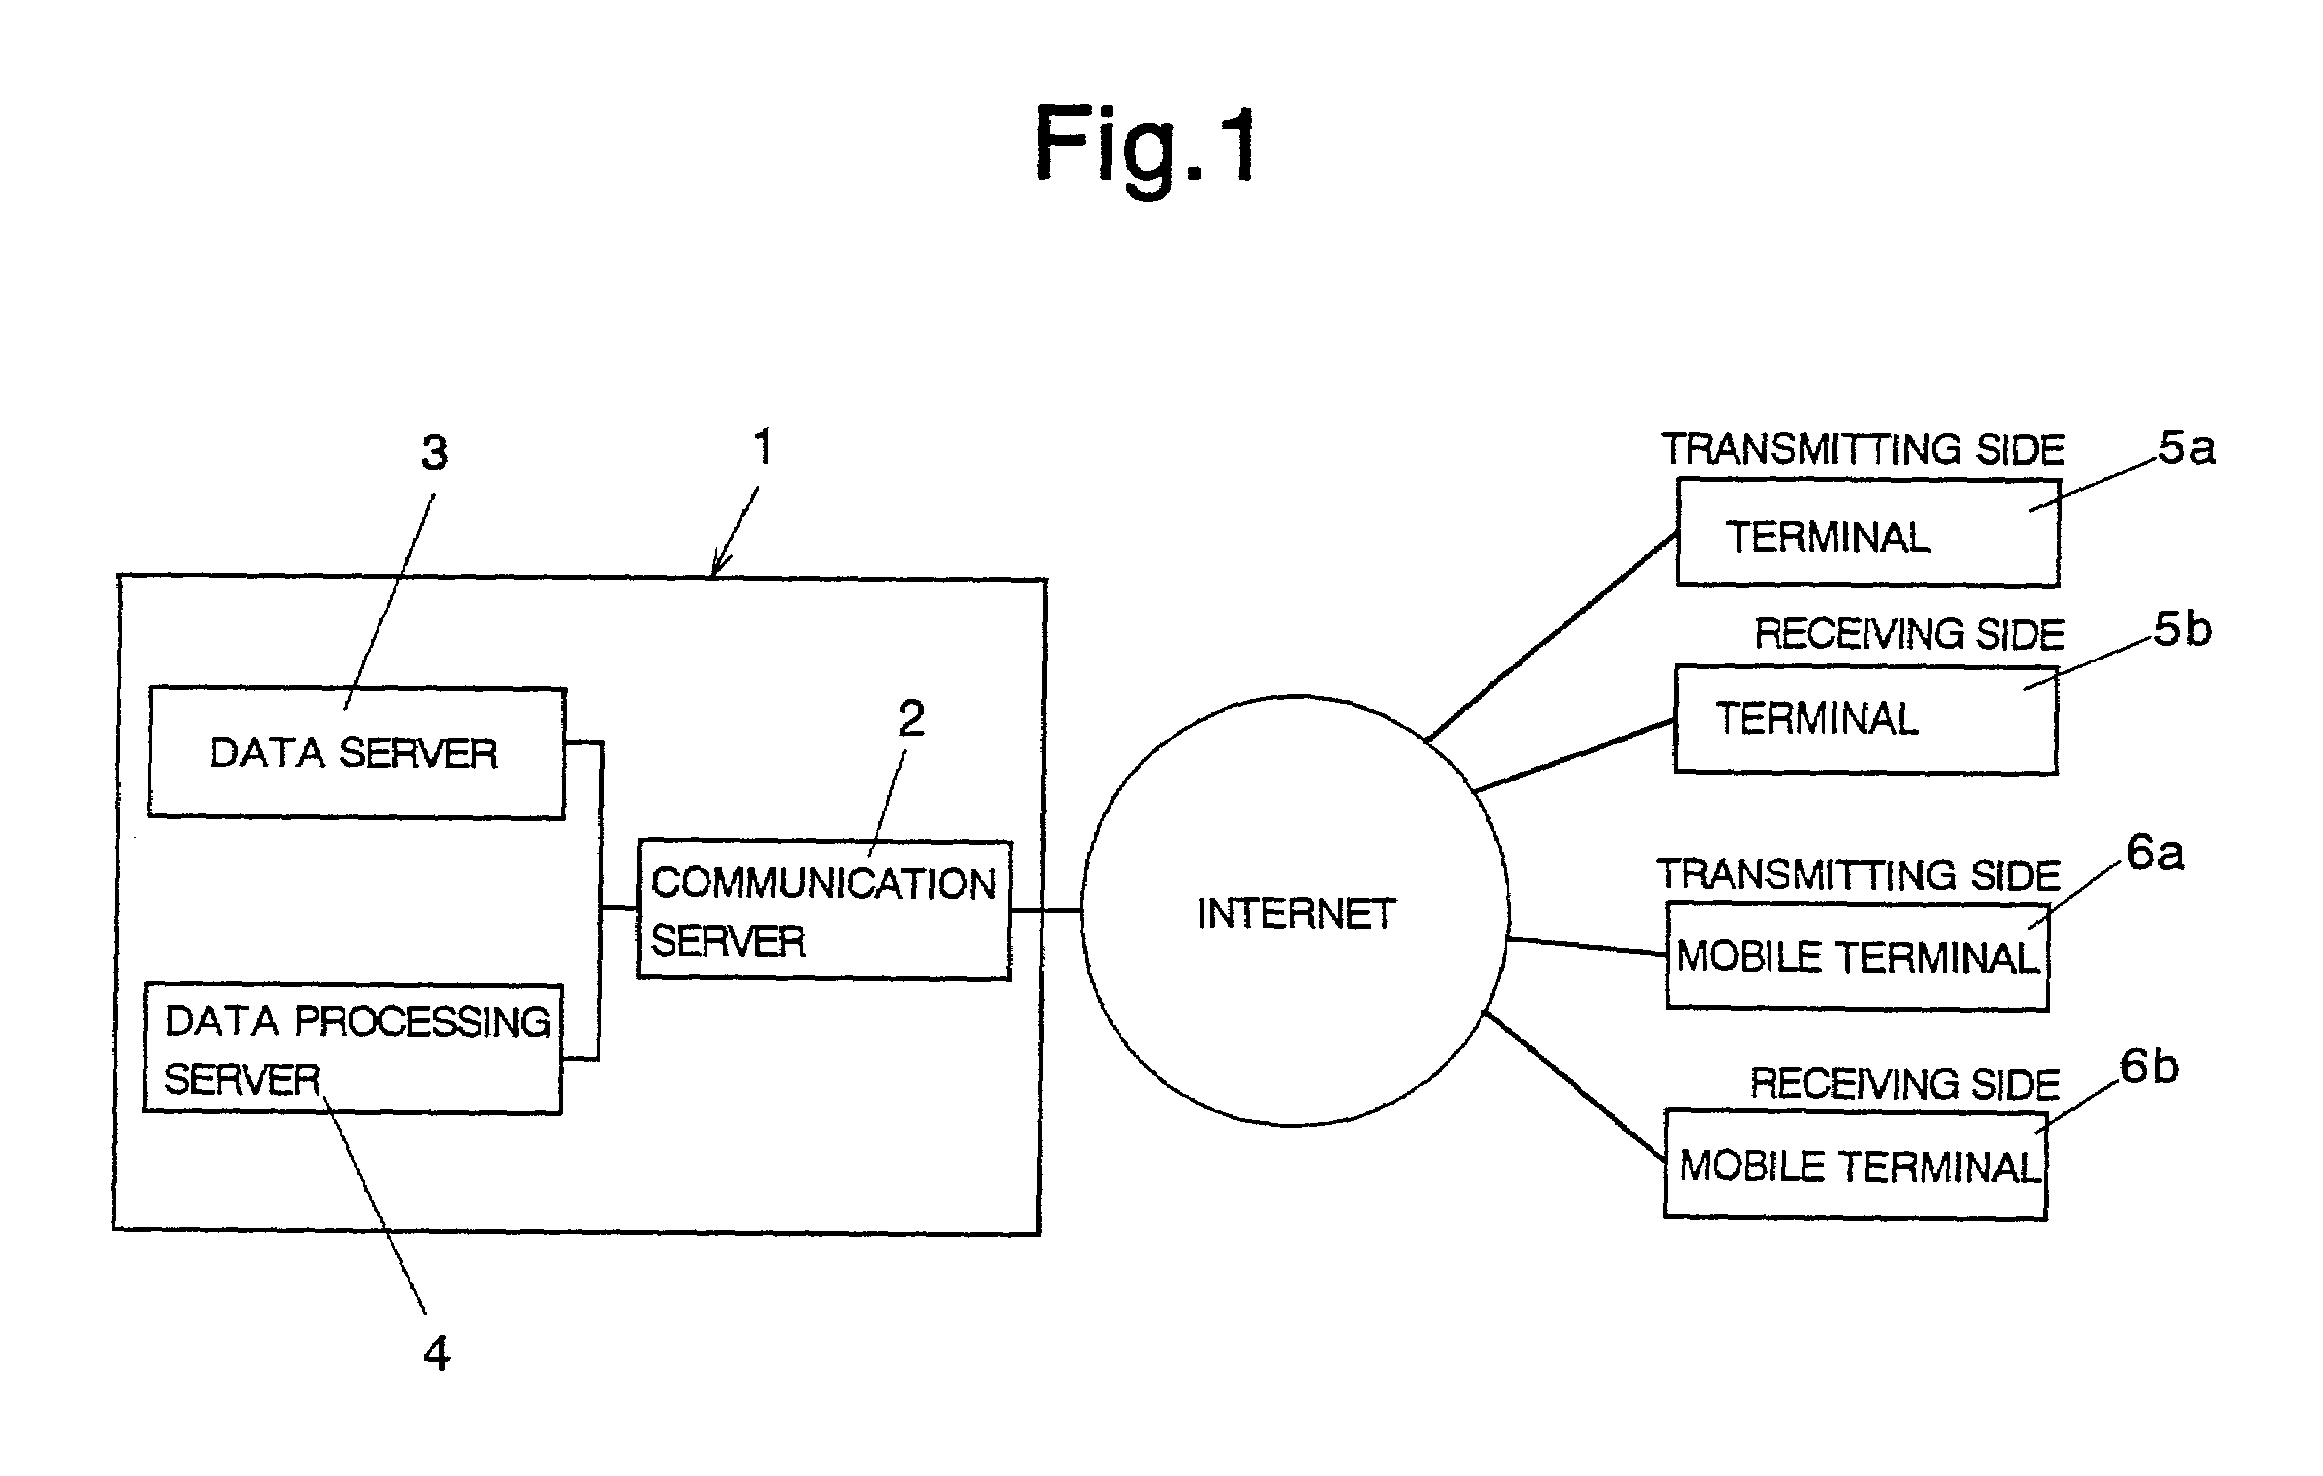 Communications system for transmitting, receiving, and displaying an image and associated image action information